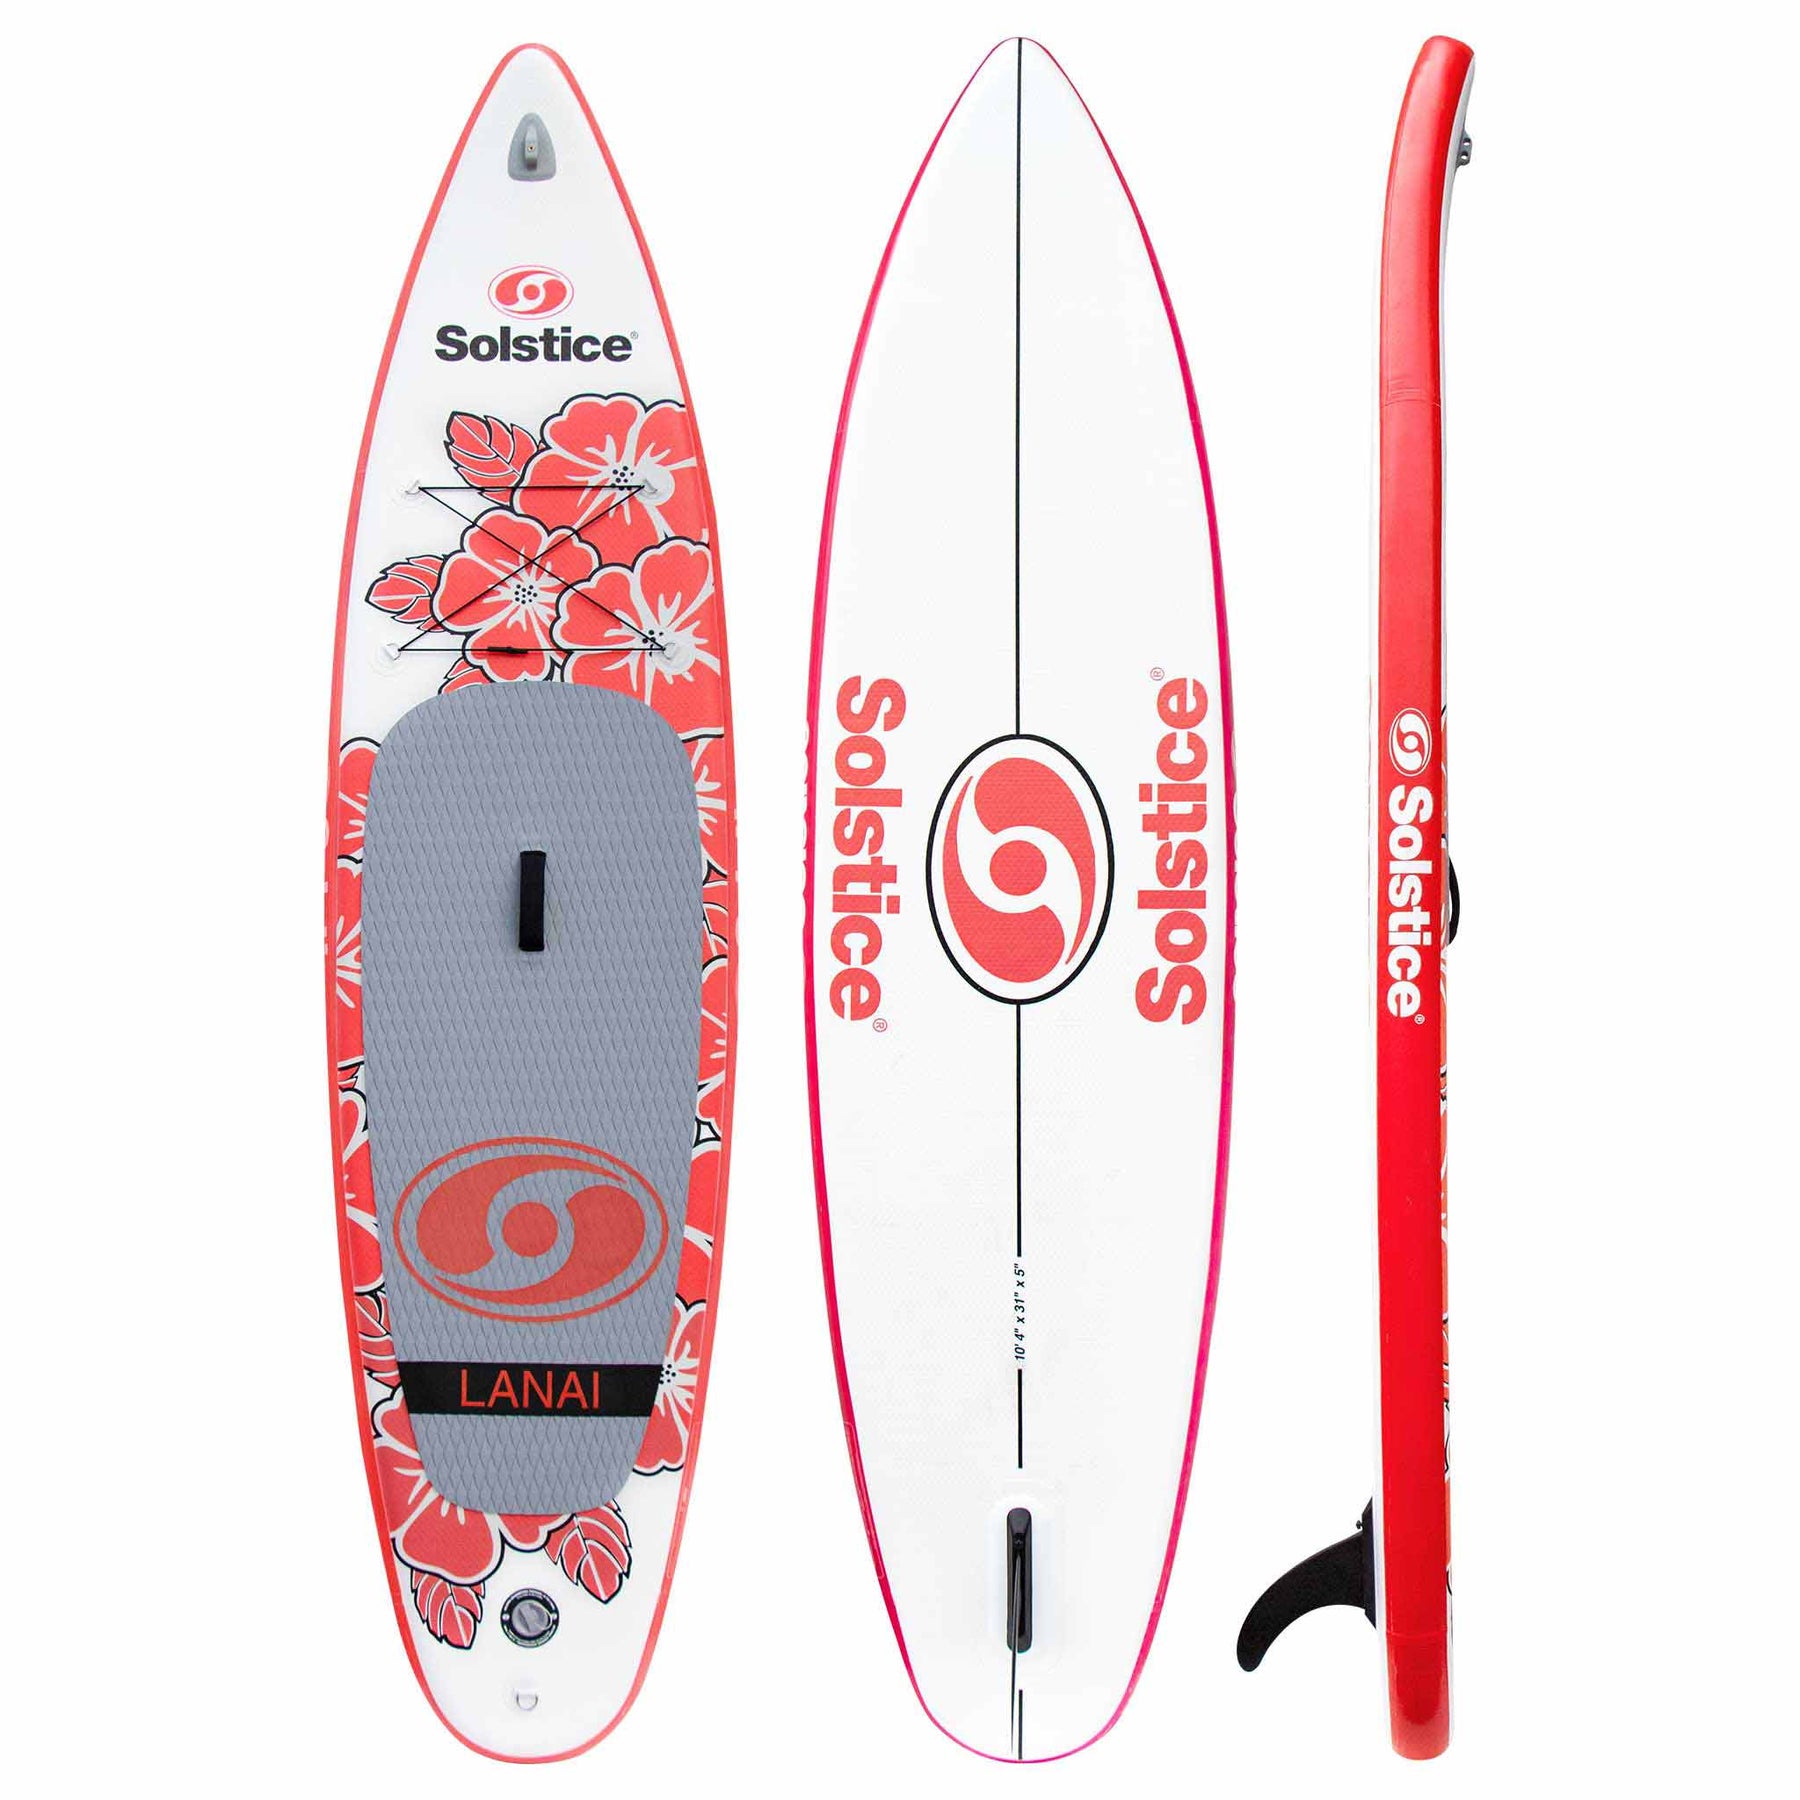 Solstice Watersports Lanai Inflatable Stand Up Paddleboard 10'4